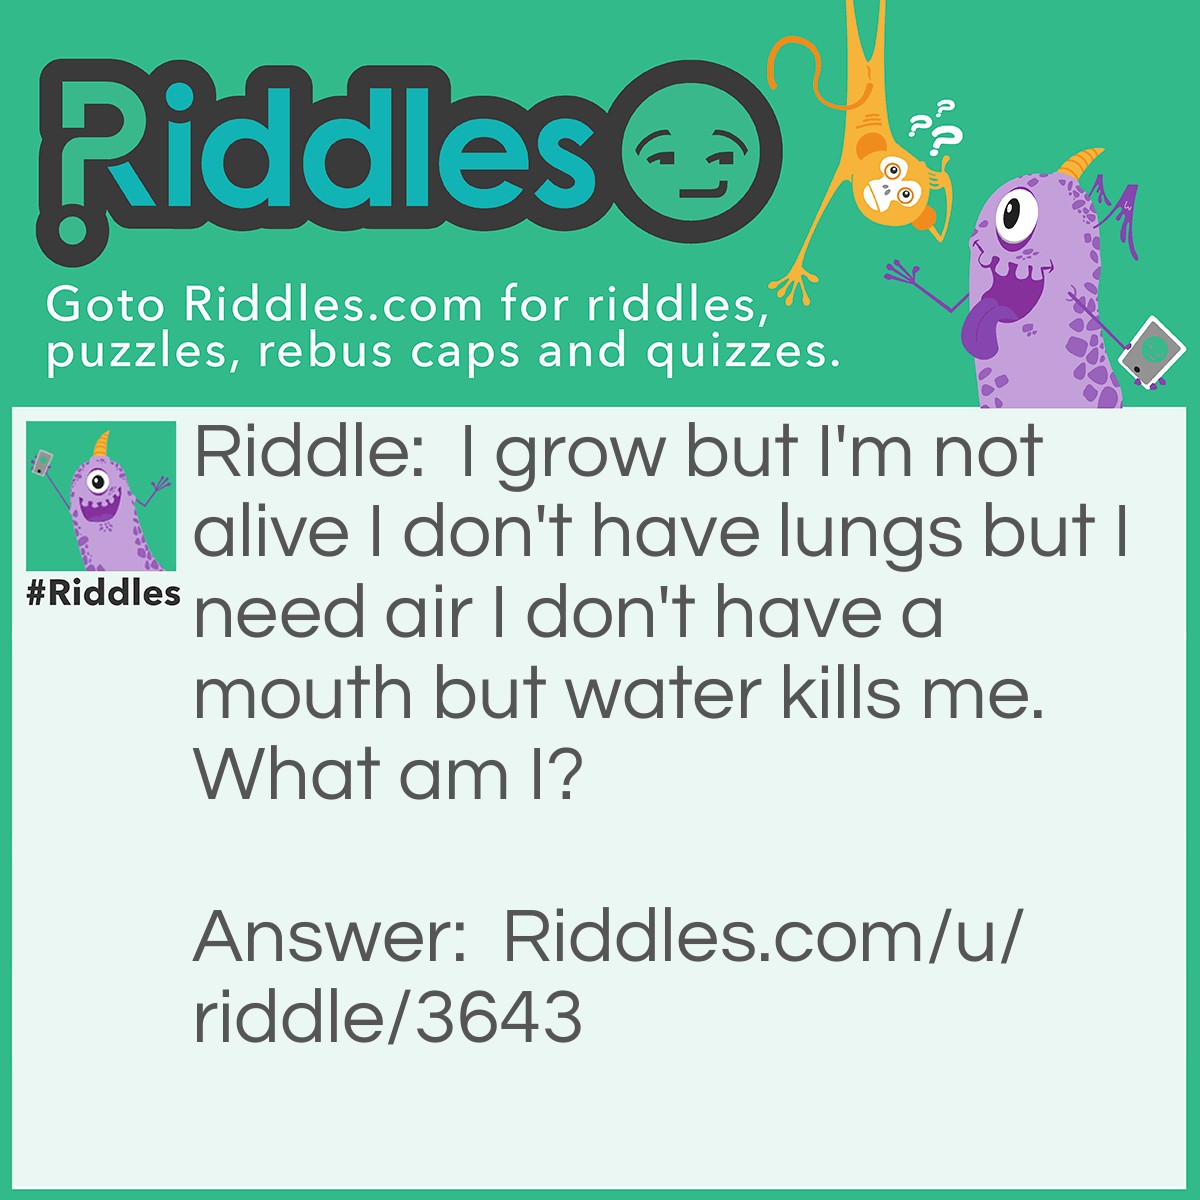 Riddle: I grow but I'm not alive I don't have lungs but I need air I don't have a mouth but water kills me. What am I? Answer: Fire.